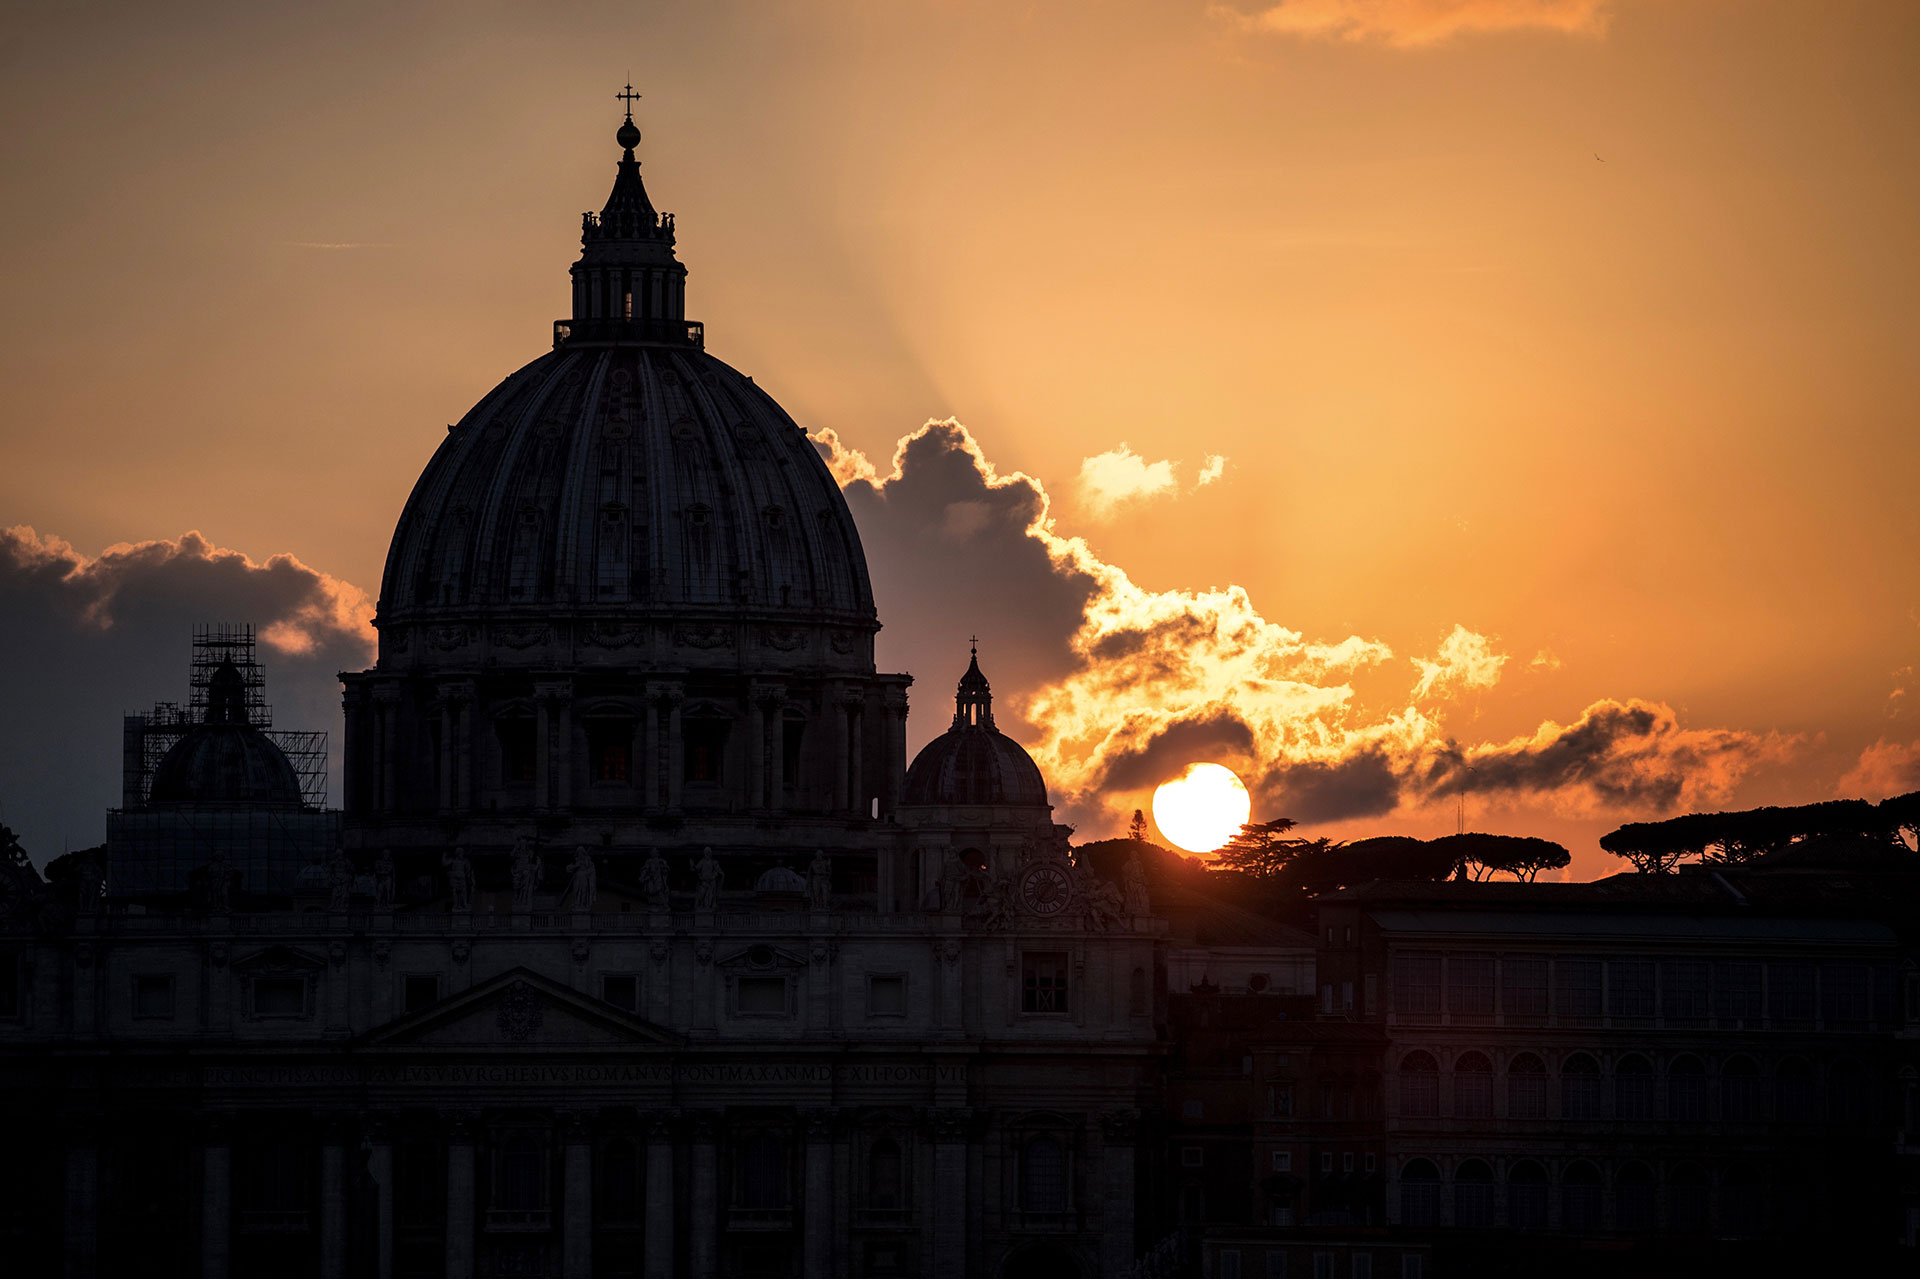 St.Peter's Basilica during the sunset from the terrace of Castel Sant'Angelo. The Italian government declared a state of emergency on January 31 to fast-track efforts to prevent the spread of the deadly coronavirus strain after two cases were confirmed in Rome. Rome, January 31 2020-Laura Venezia 